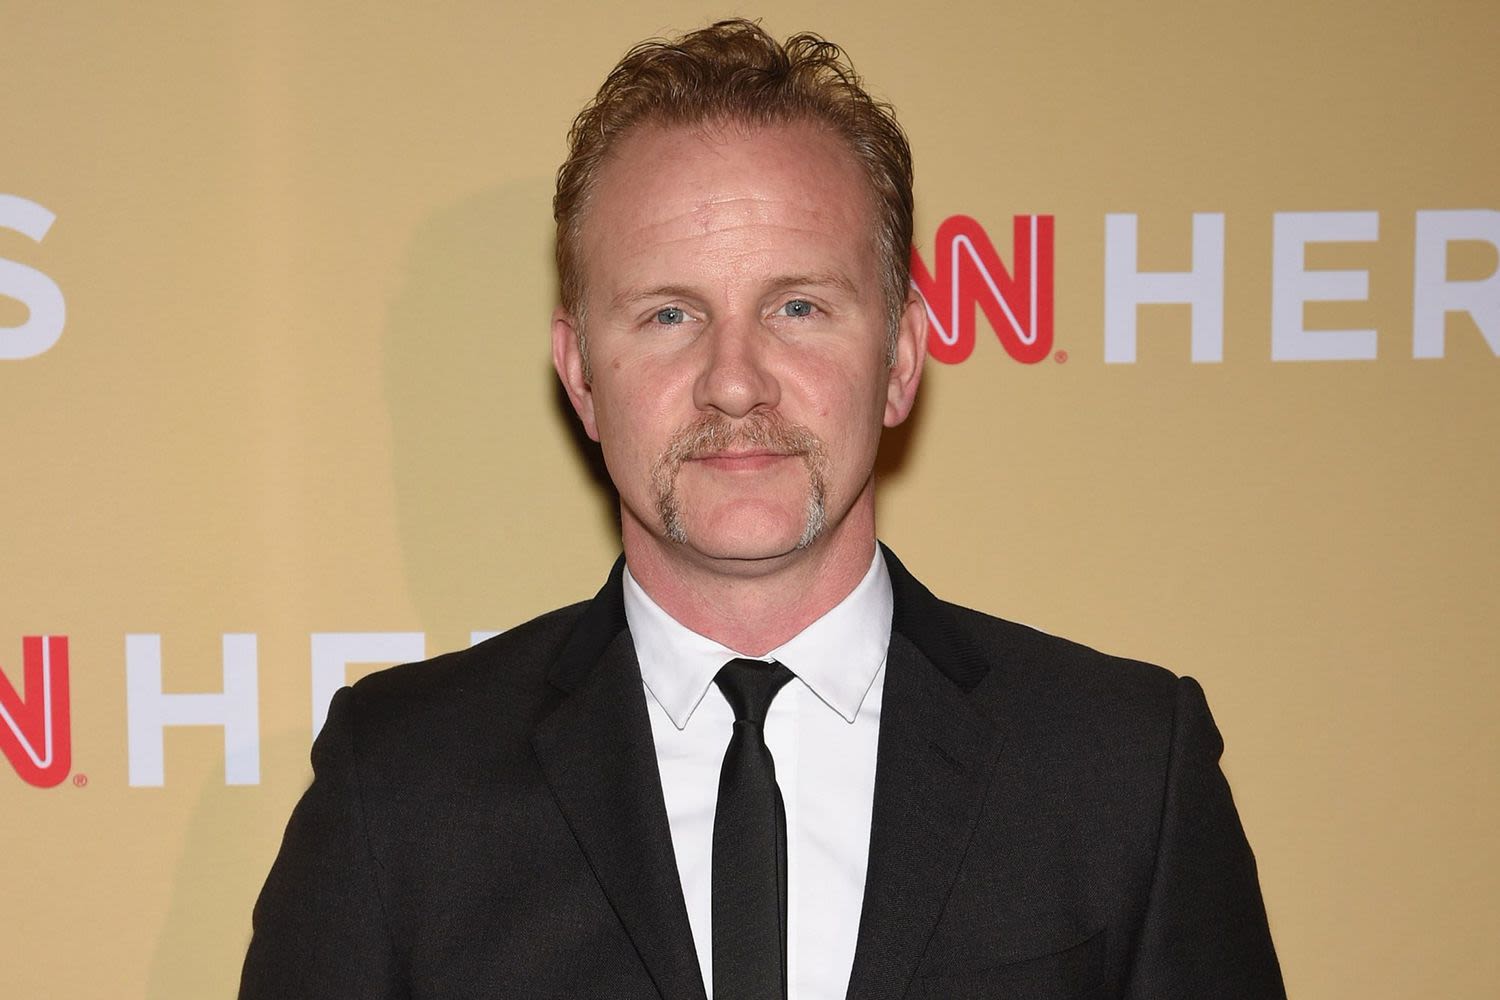 Morgan Spurlock, Star of 'Super Size Me' Documentary, Dead at 53 from Complications of Cancer